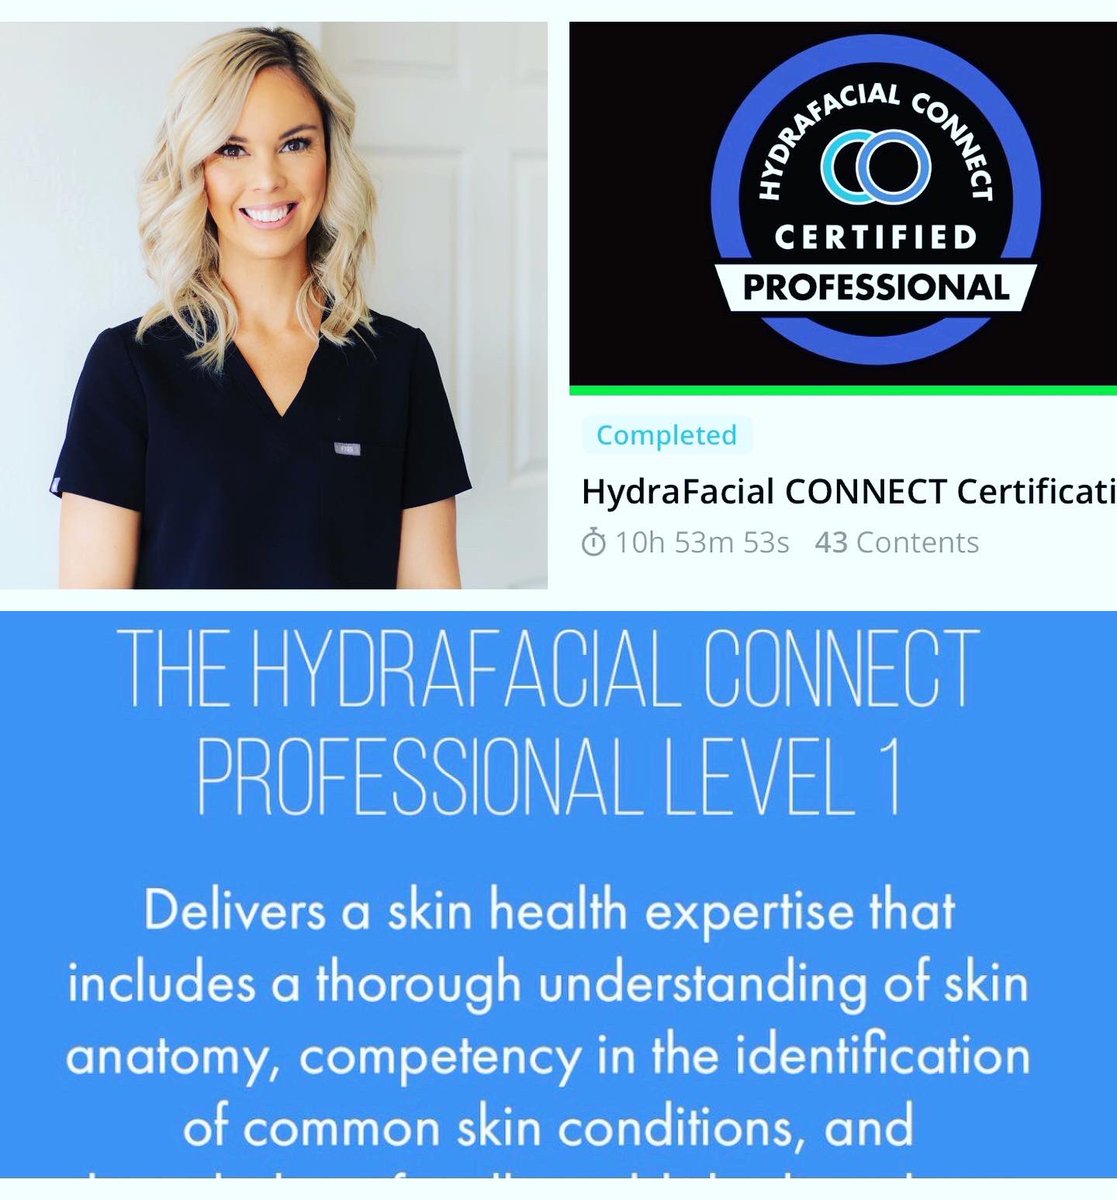 Congratulations Kendra connect level 1 for Hydrafacial continued education 🎉 #hydrafacial #hydrafacialconnect